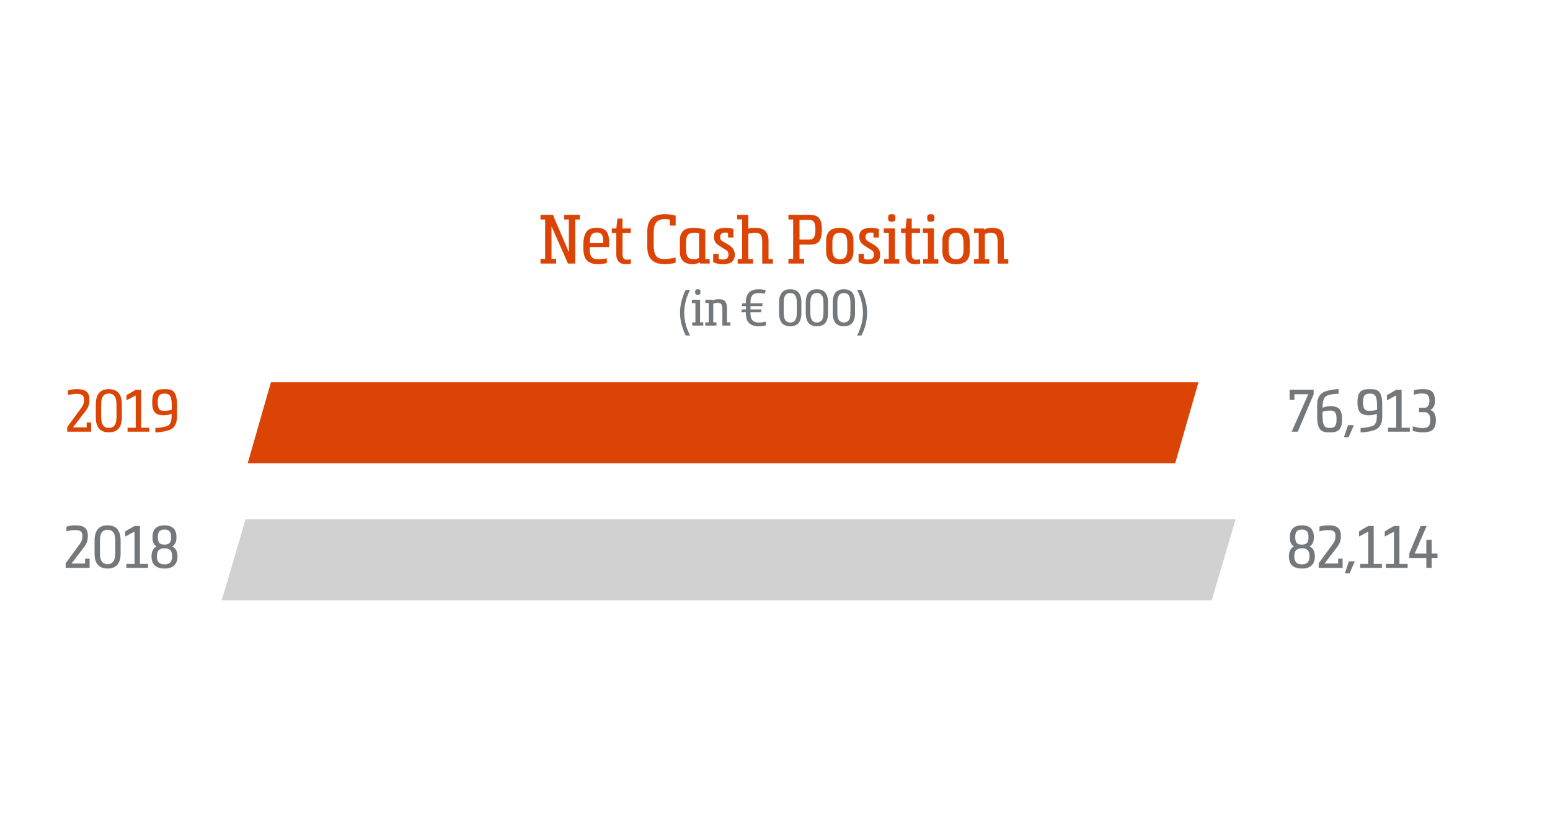 SD Worx Annual report 2109 | Net Cash Position